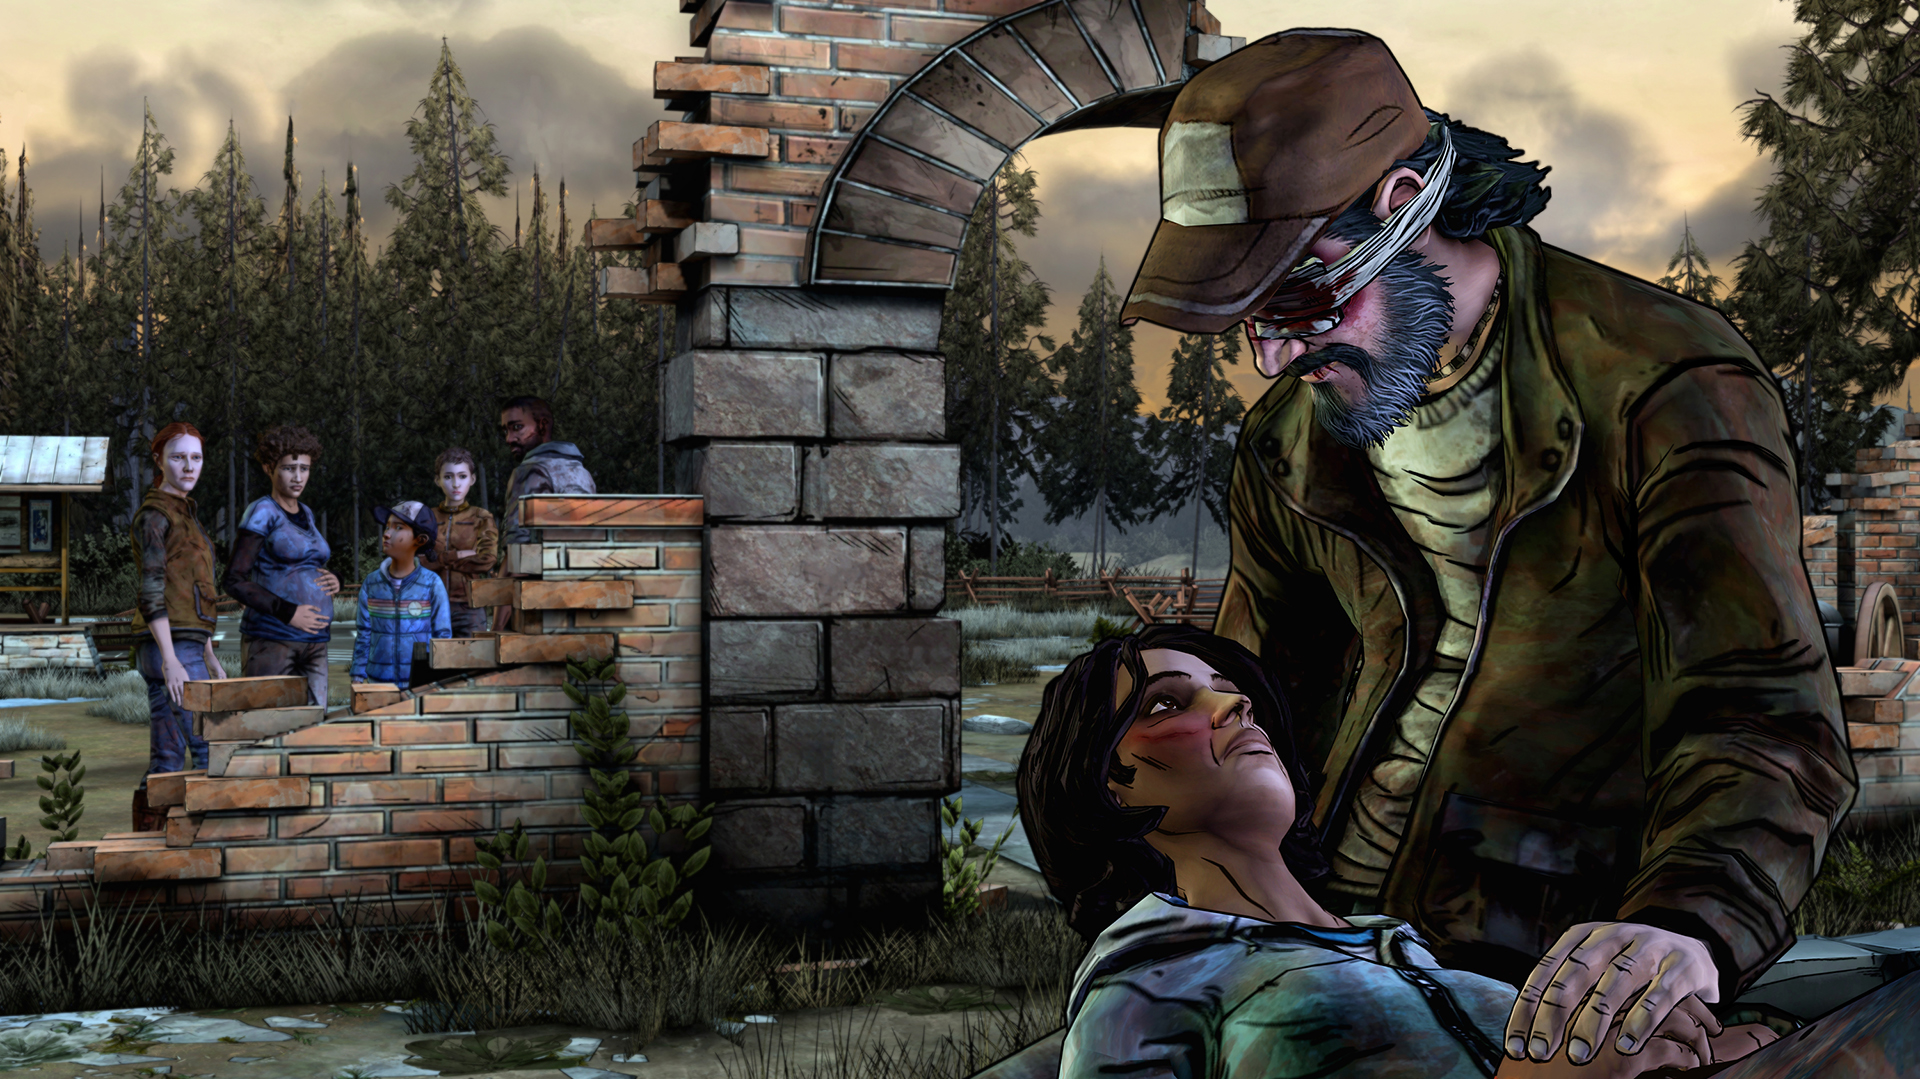 The Walking Dead Game Of The Year Edition Available On PS3, Xbox 360, PC